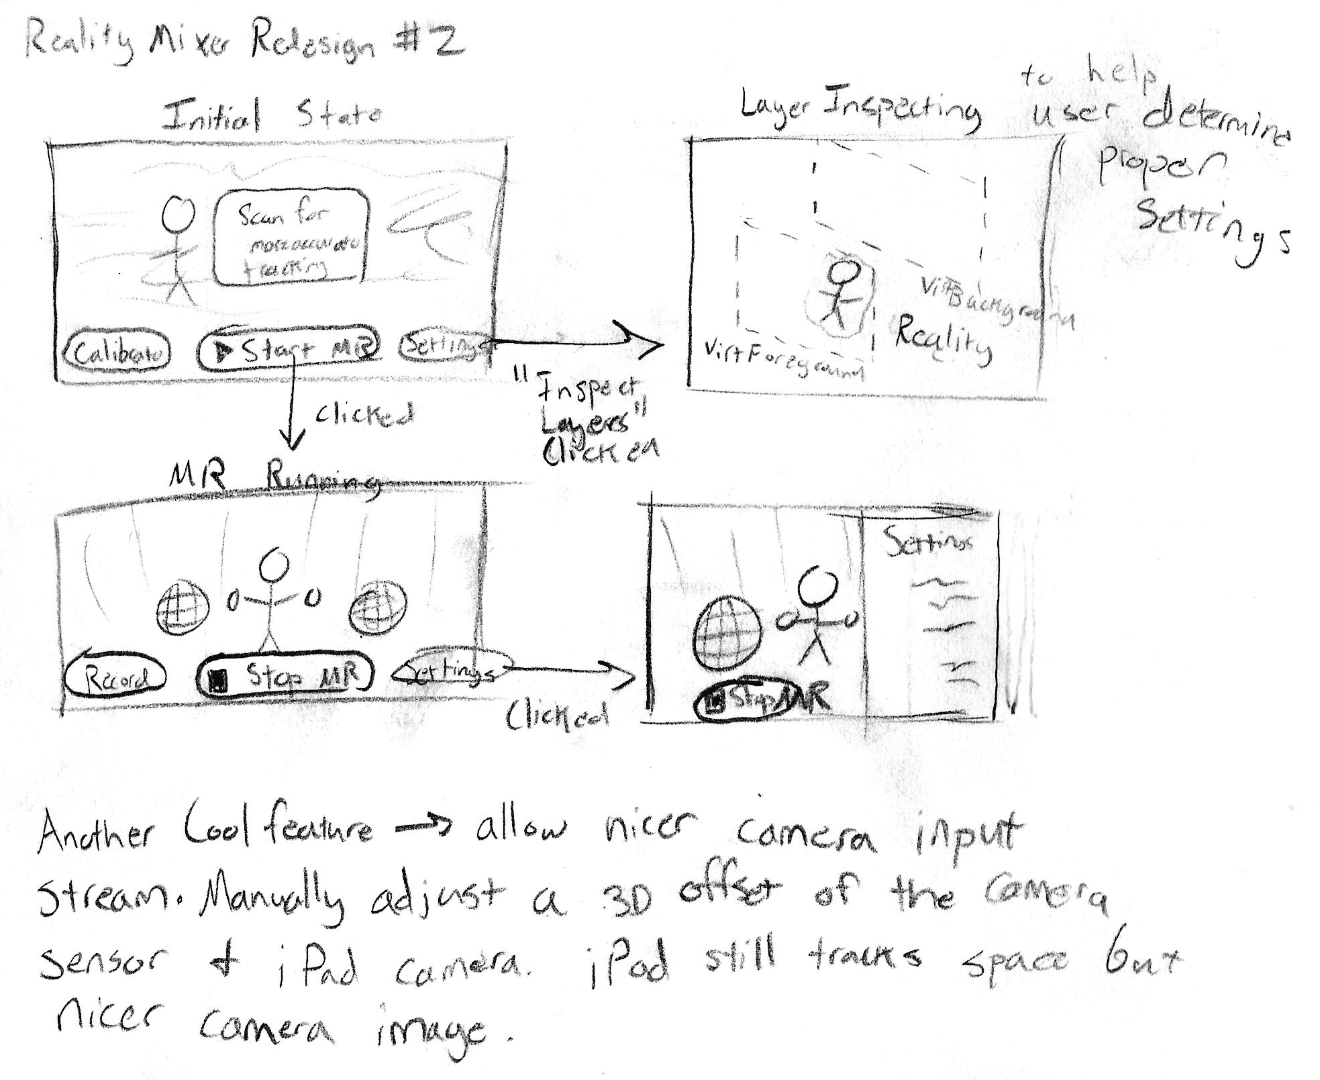 A hand-drawn sketch showing different UI states of the AR app. The UI shows only a few key buttons to transition between calibration and recording states and has a panel that pops out from the side of the UI to reveal settings. Also depicts a Layer Inspector UI idea that could show the user of the app individual video layers in a 3D angled view.